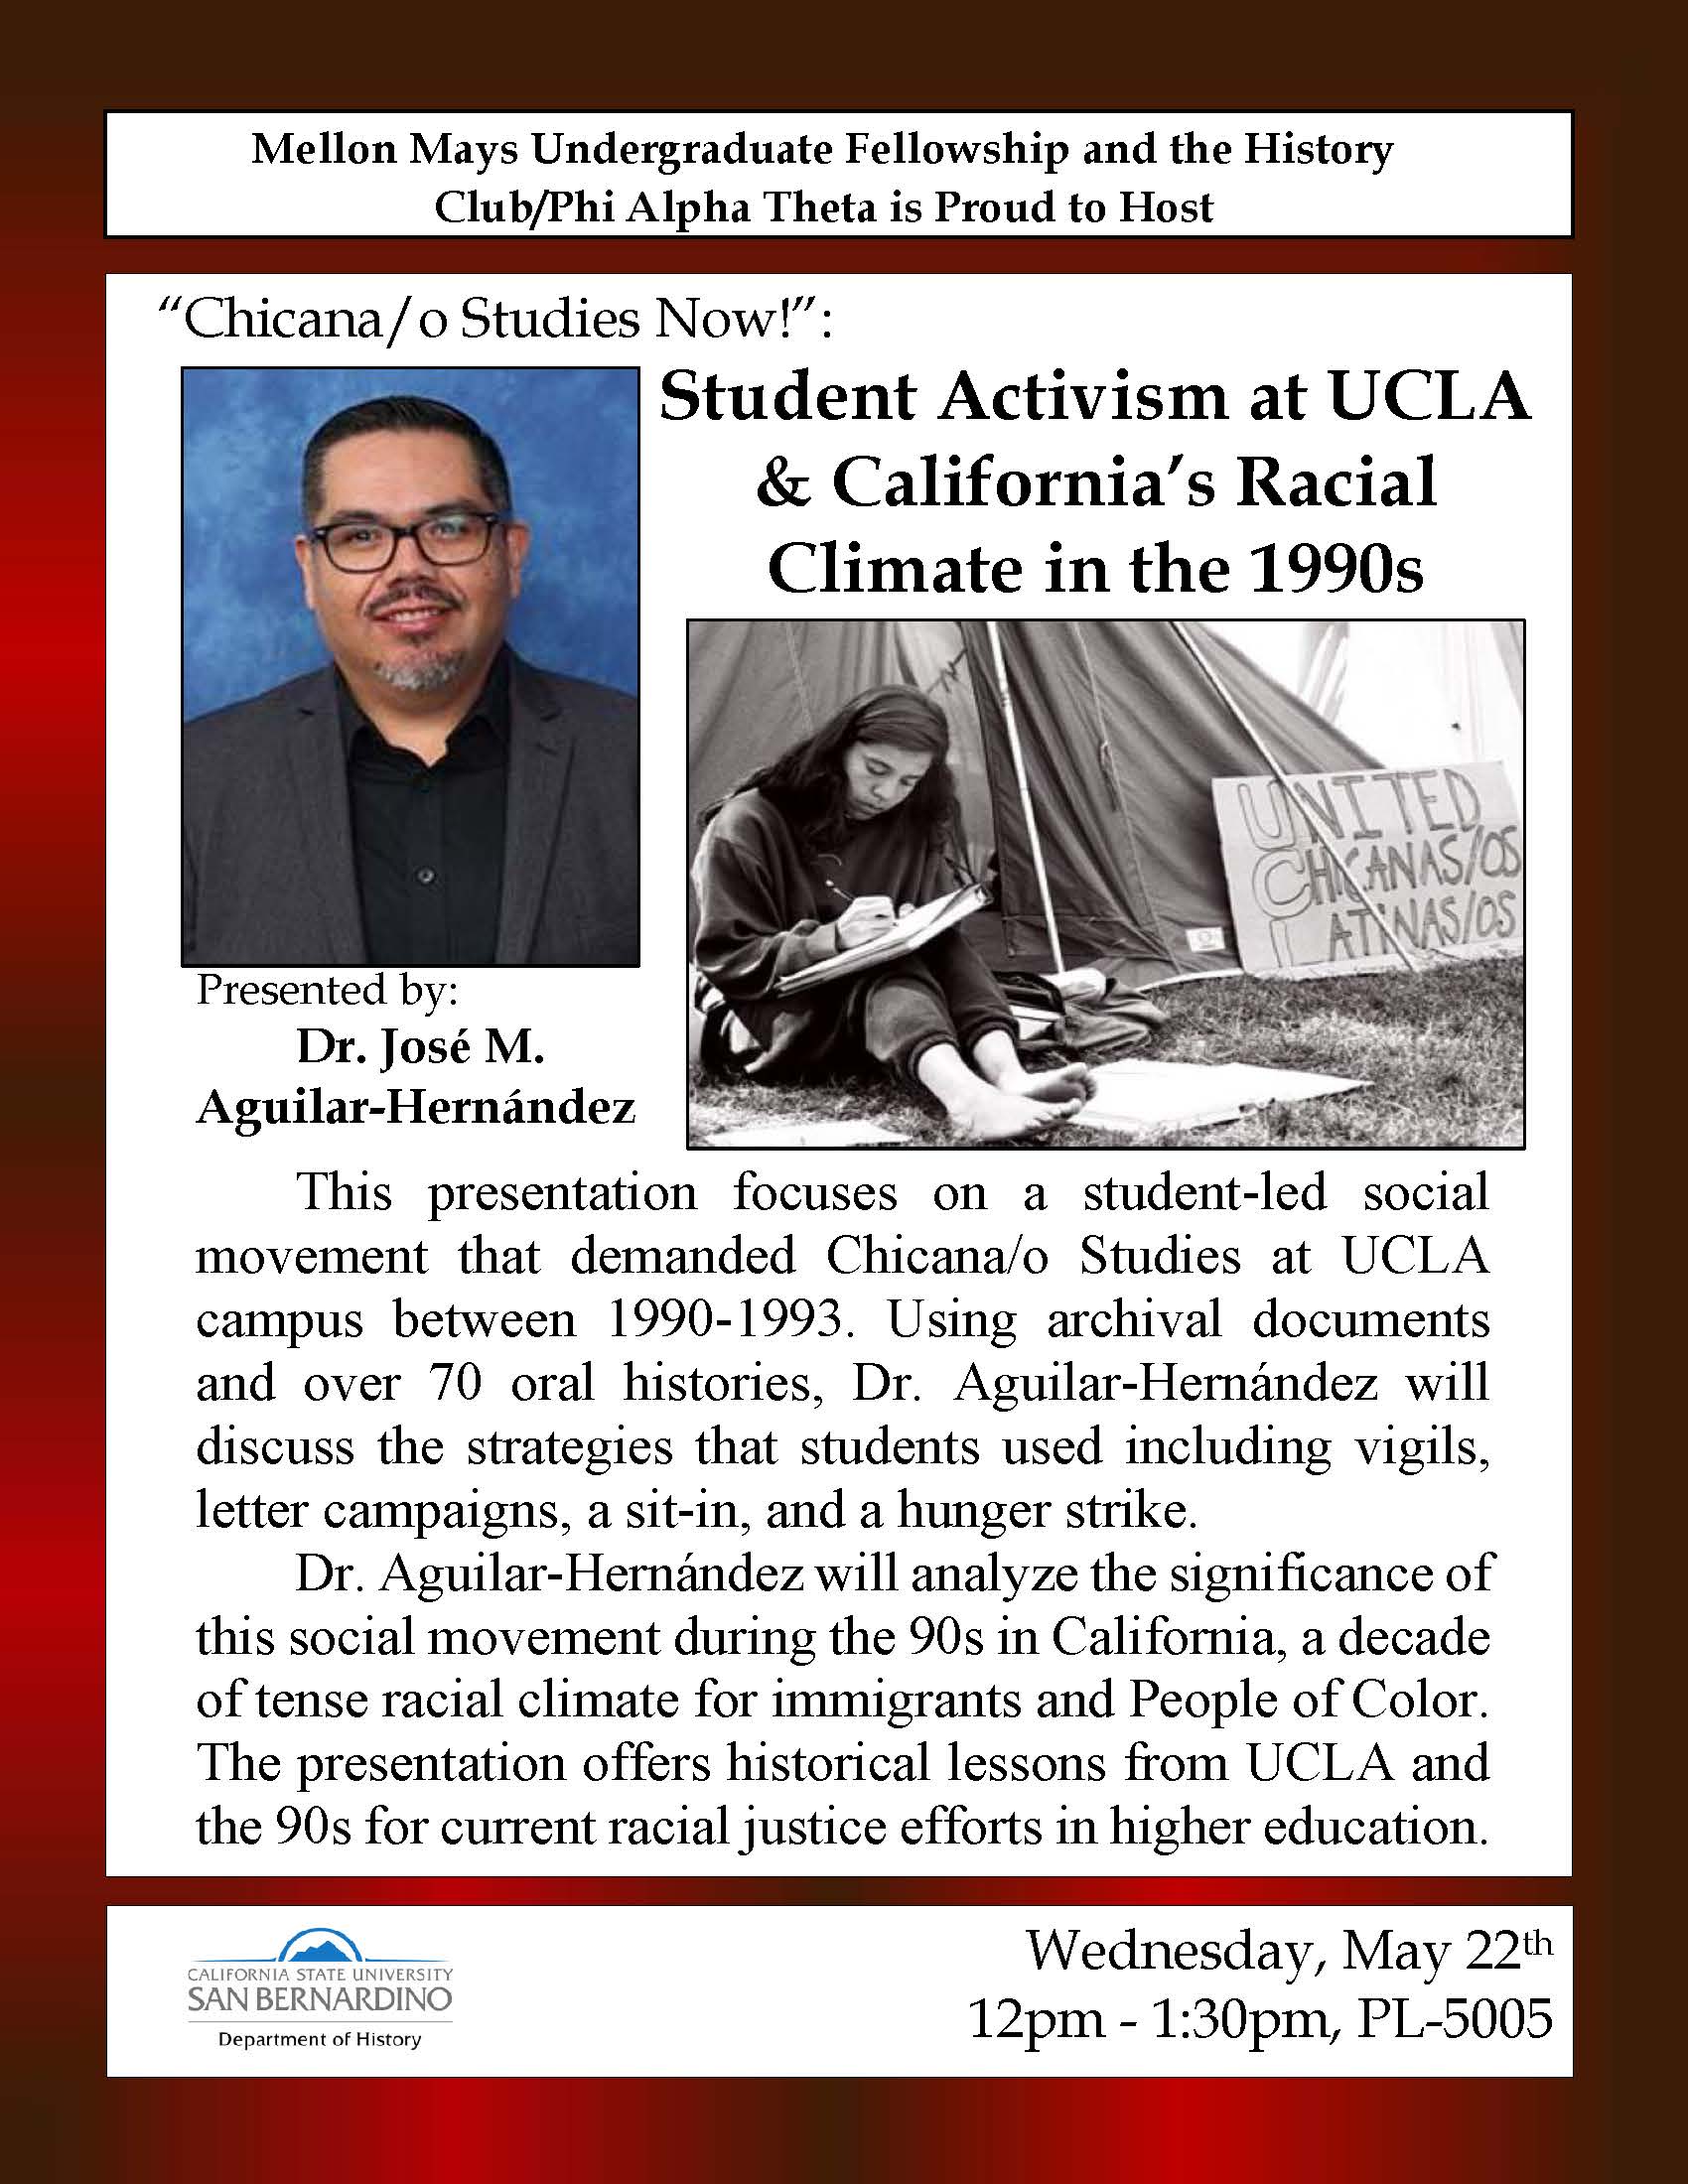 “Chicana/o Studies Now!: Student Activism at UCLA & California’s Racial Climate in the 1990s,” by José M. Aguilar-Hernández, is set for May 22